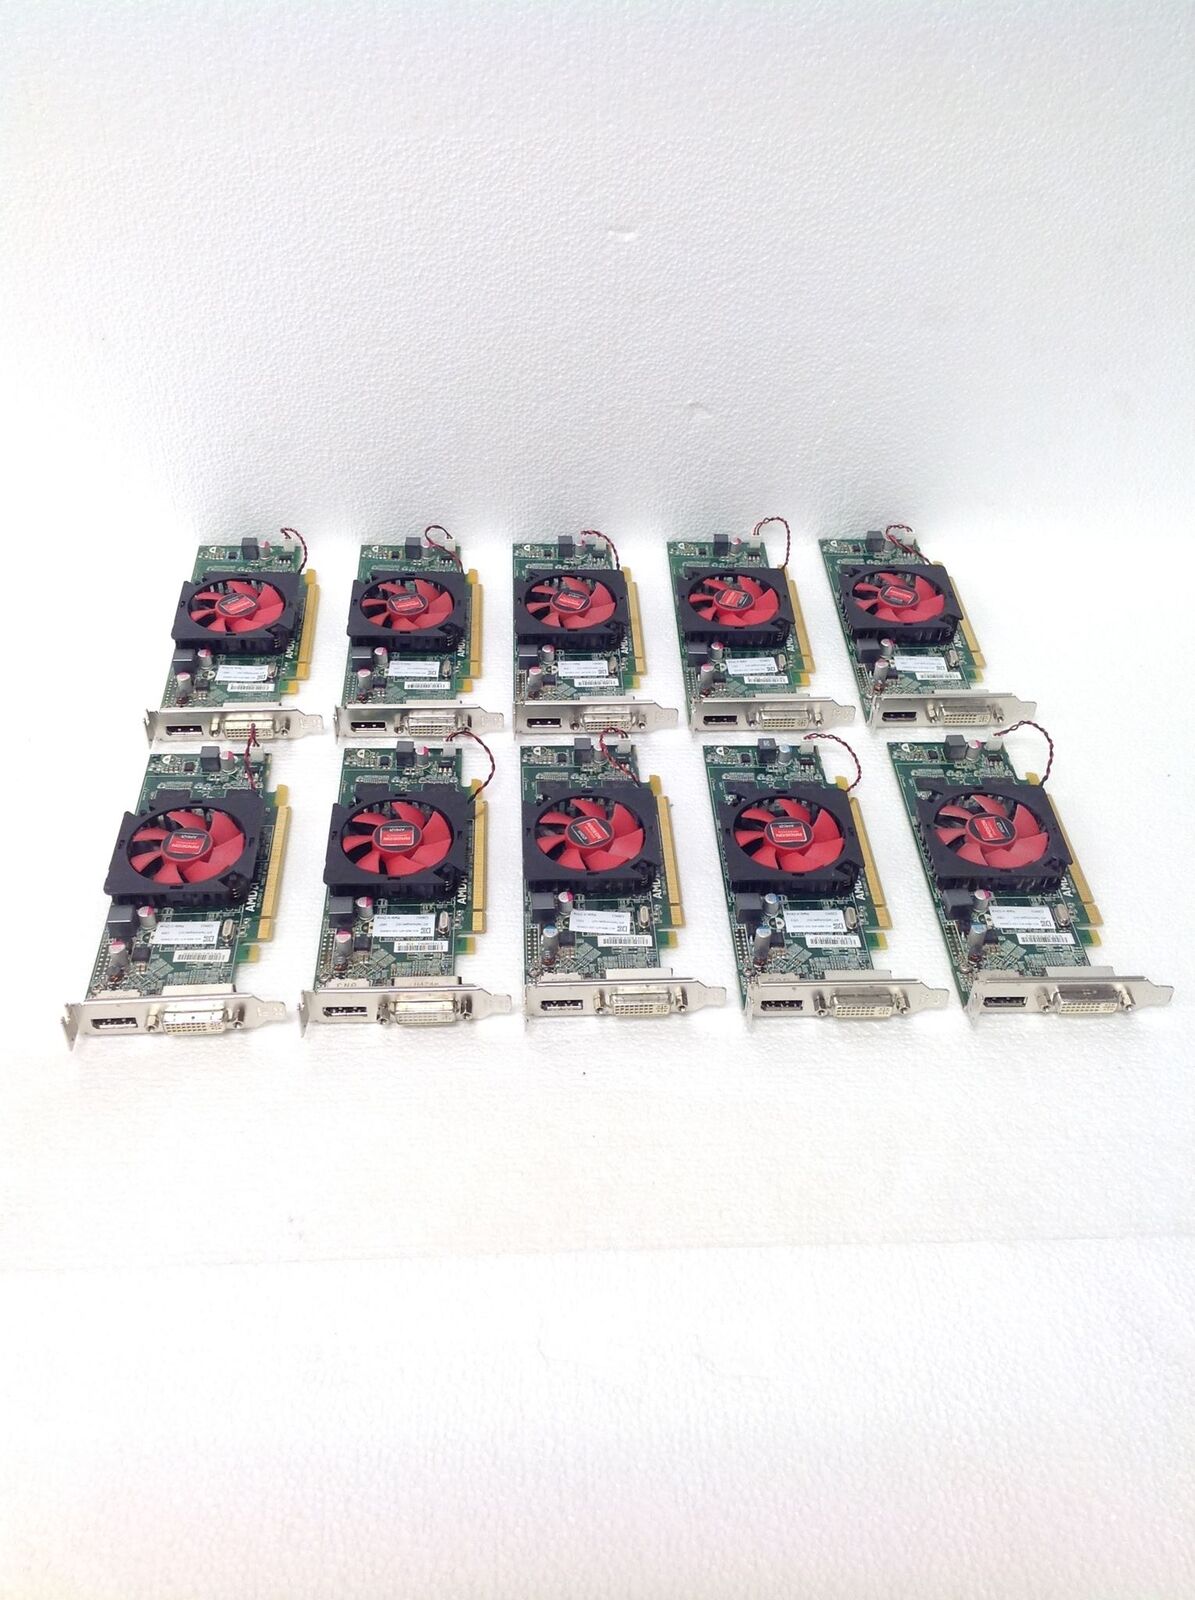 10x AMD C26411 C264 1GB DDR33 Low Profile Video Graphics Card 109C26457-01 WORKS